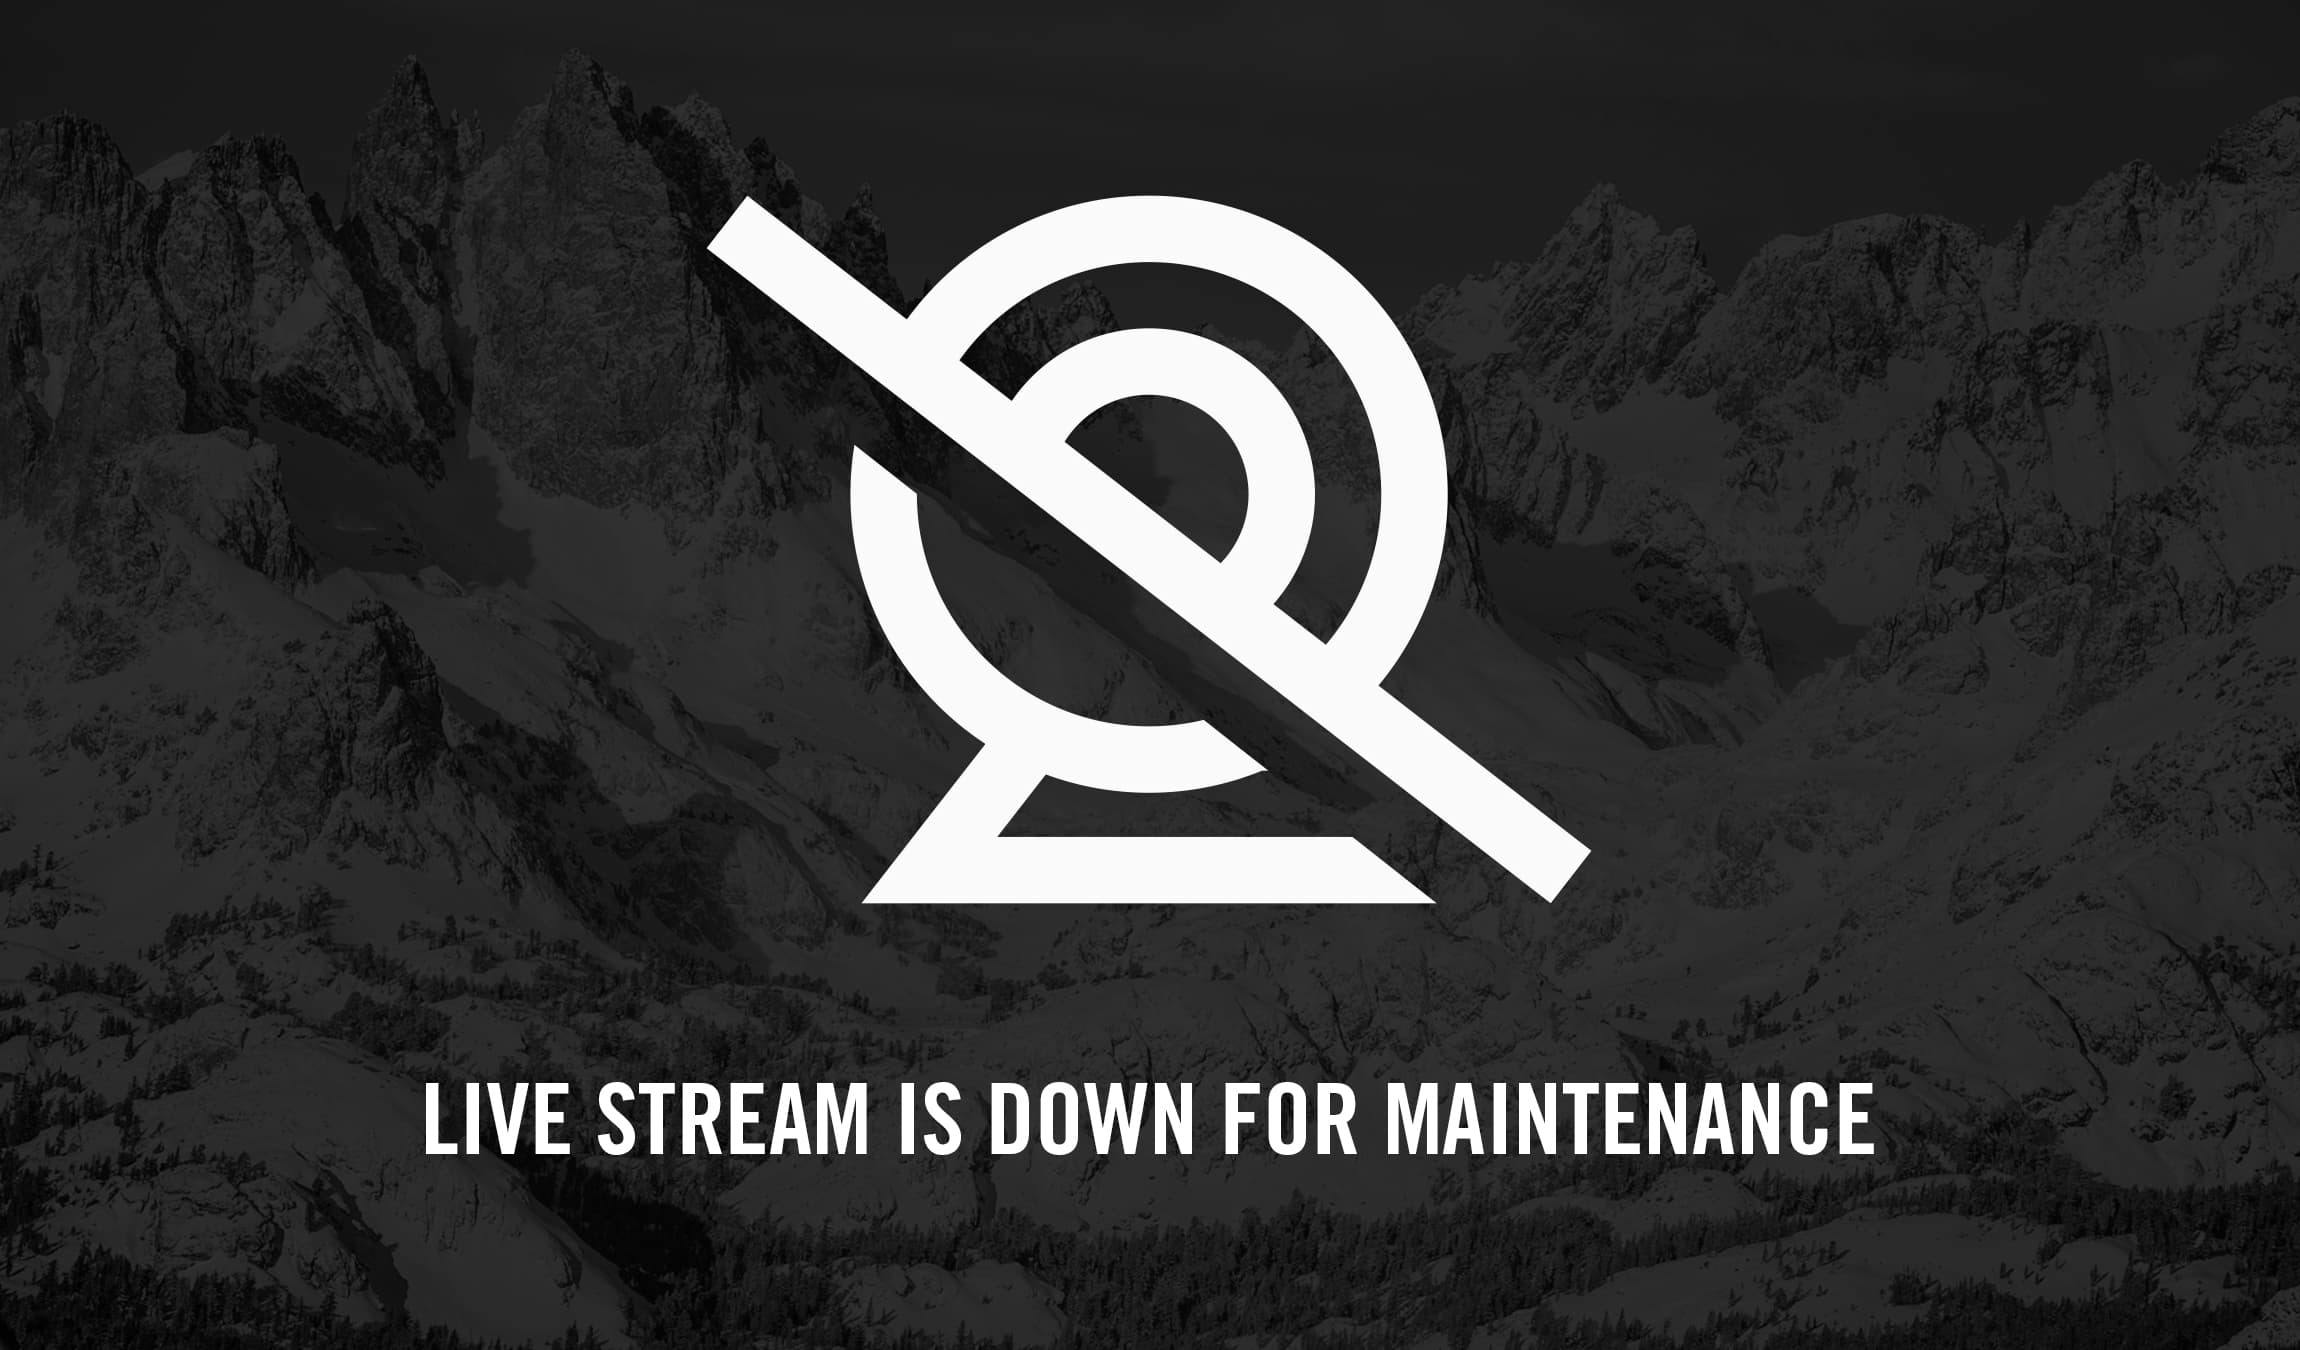 Live stream is down for maintenance.